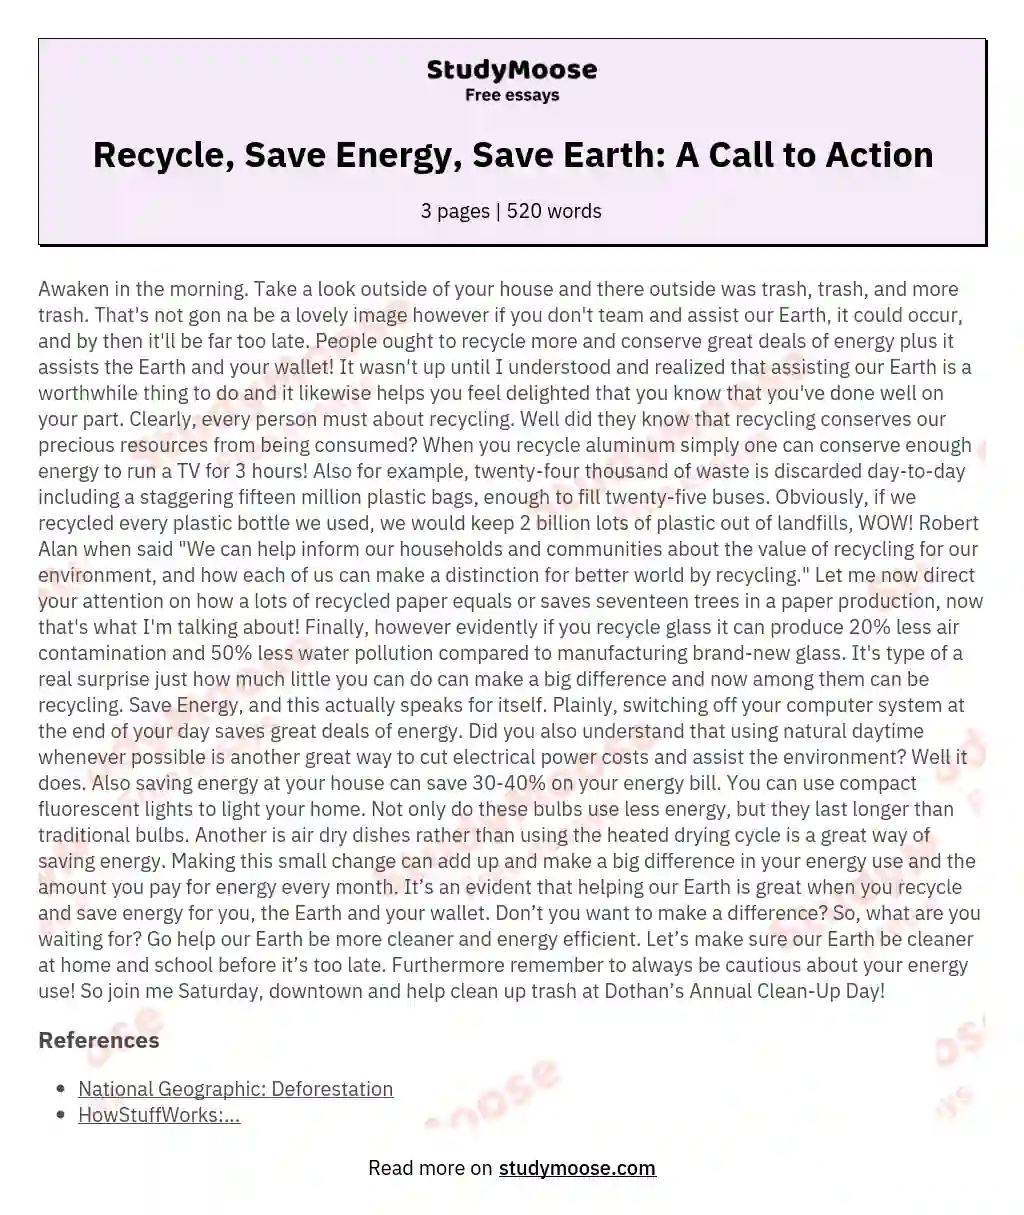 Recycle, Save Energy, Save Earth: A Call to Action essay